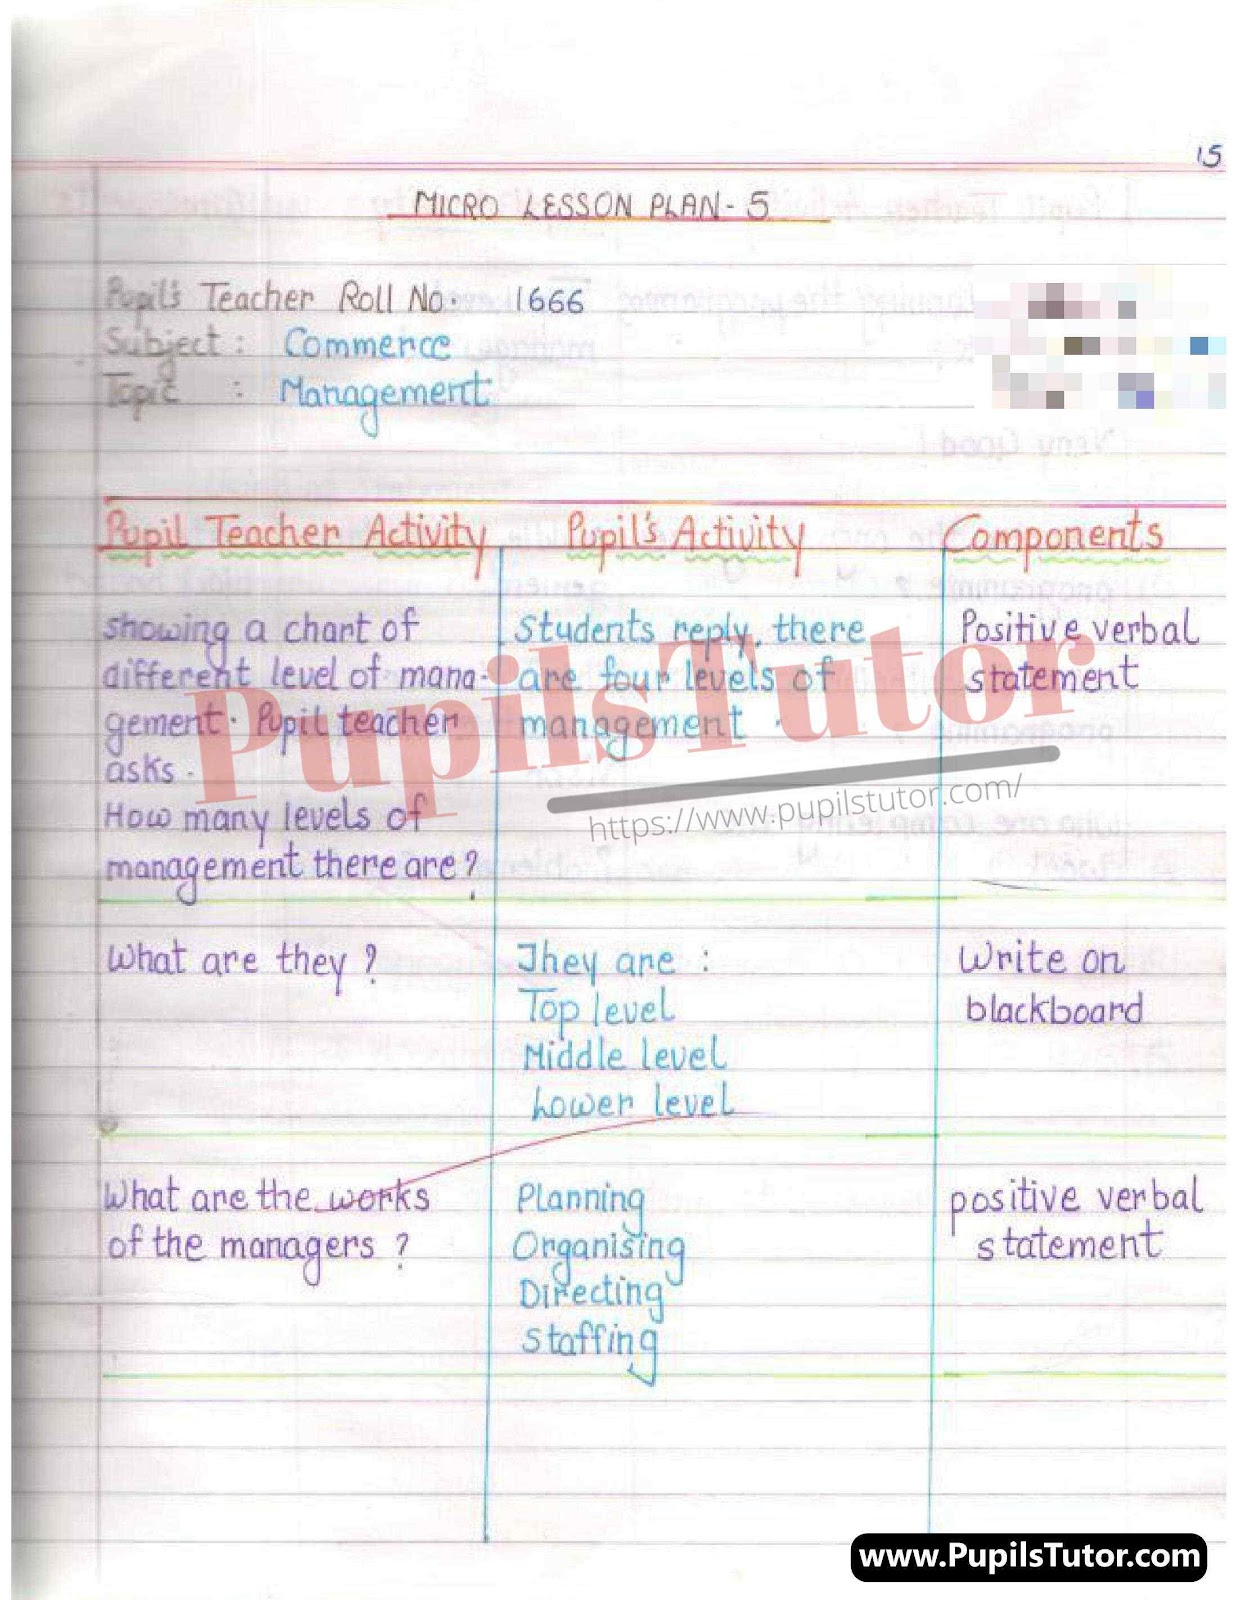 Microteaching Illustration Skill With Examples Commerce Lesson Plan For Class 11,12 On Levels Of Management – (Page And Image Number 1) – Pupils Tutor